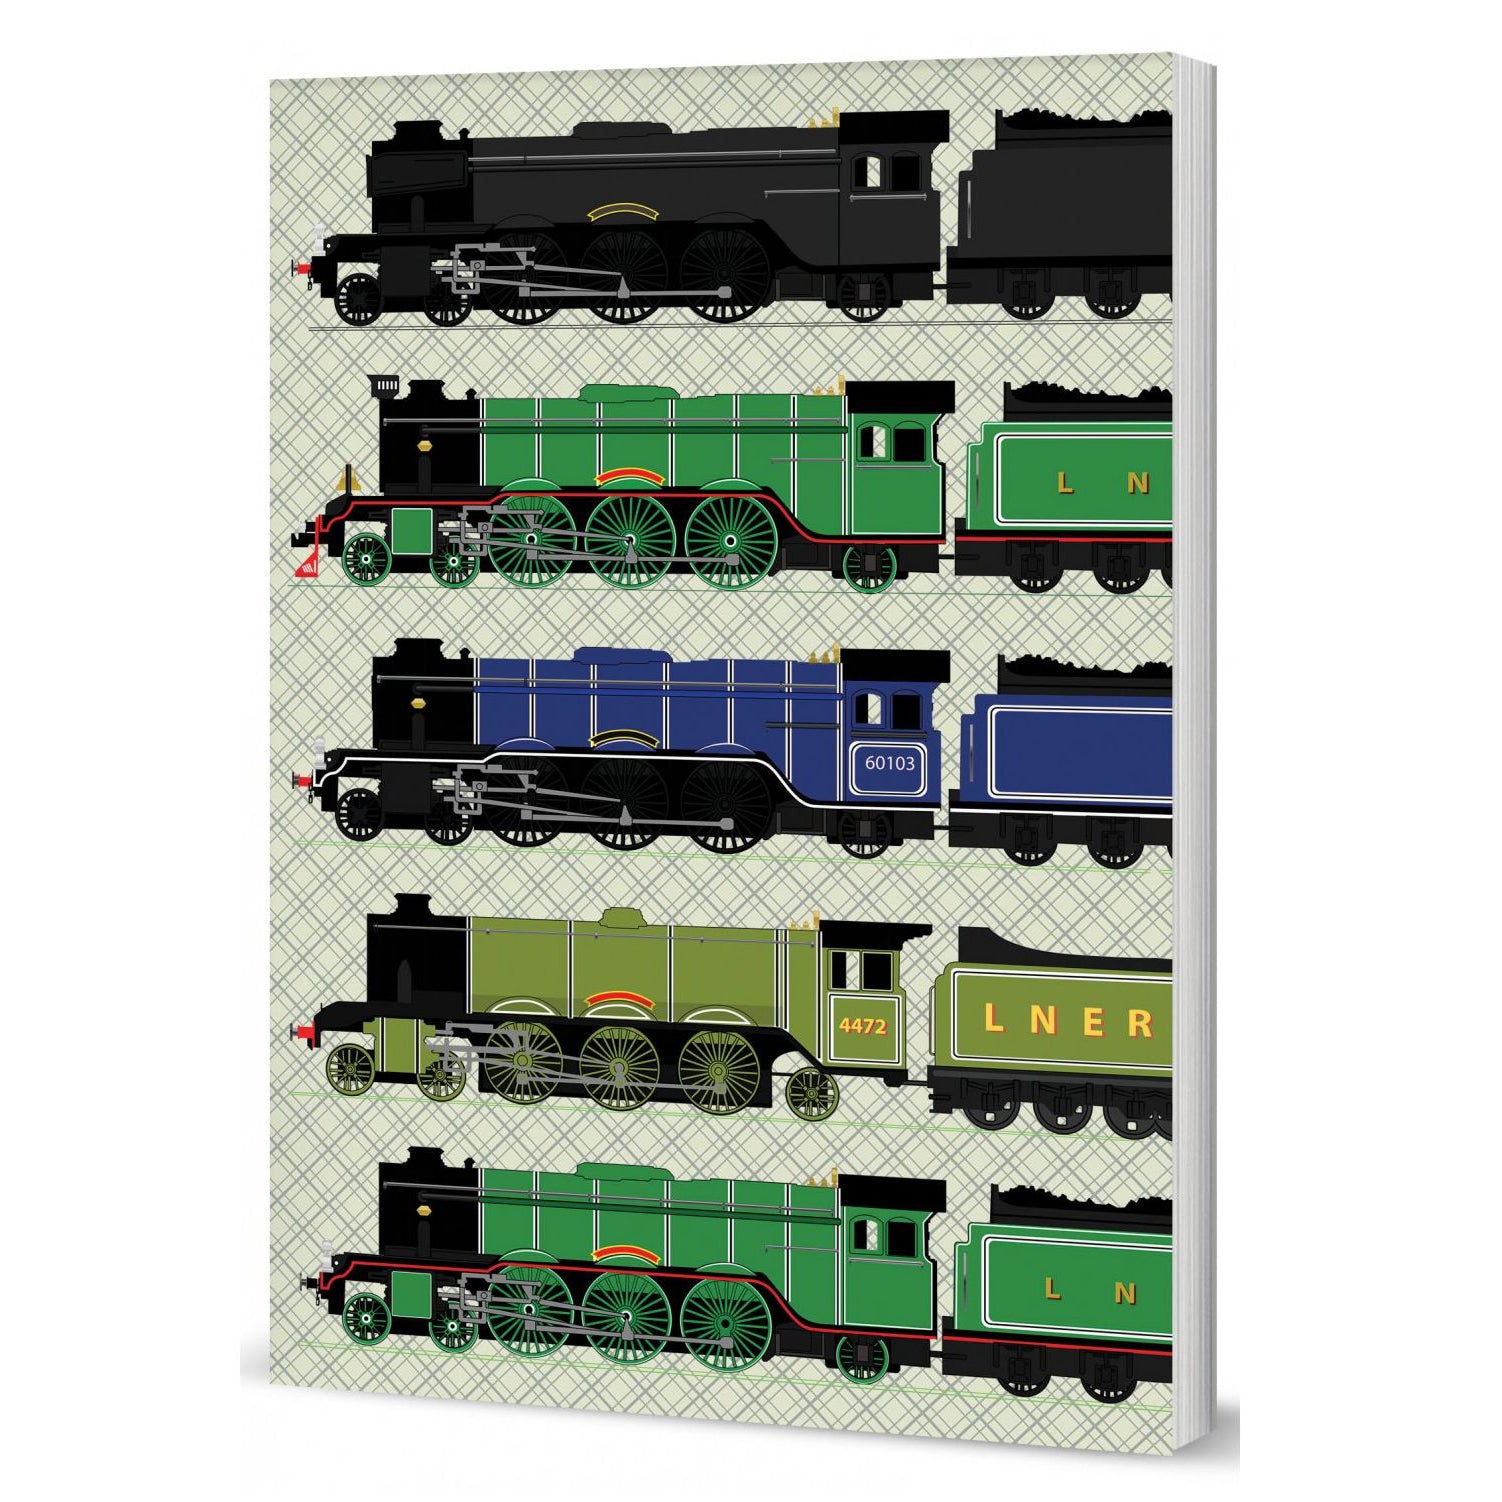 The front cover of the notebook showing 5 different illustrations of the Flying Scotsman in 5 different liveries.